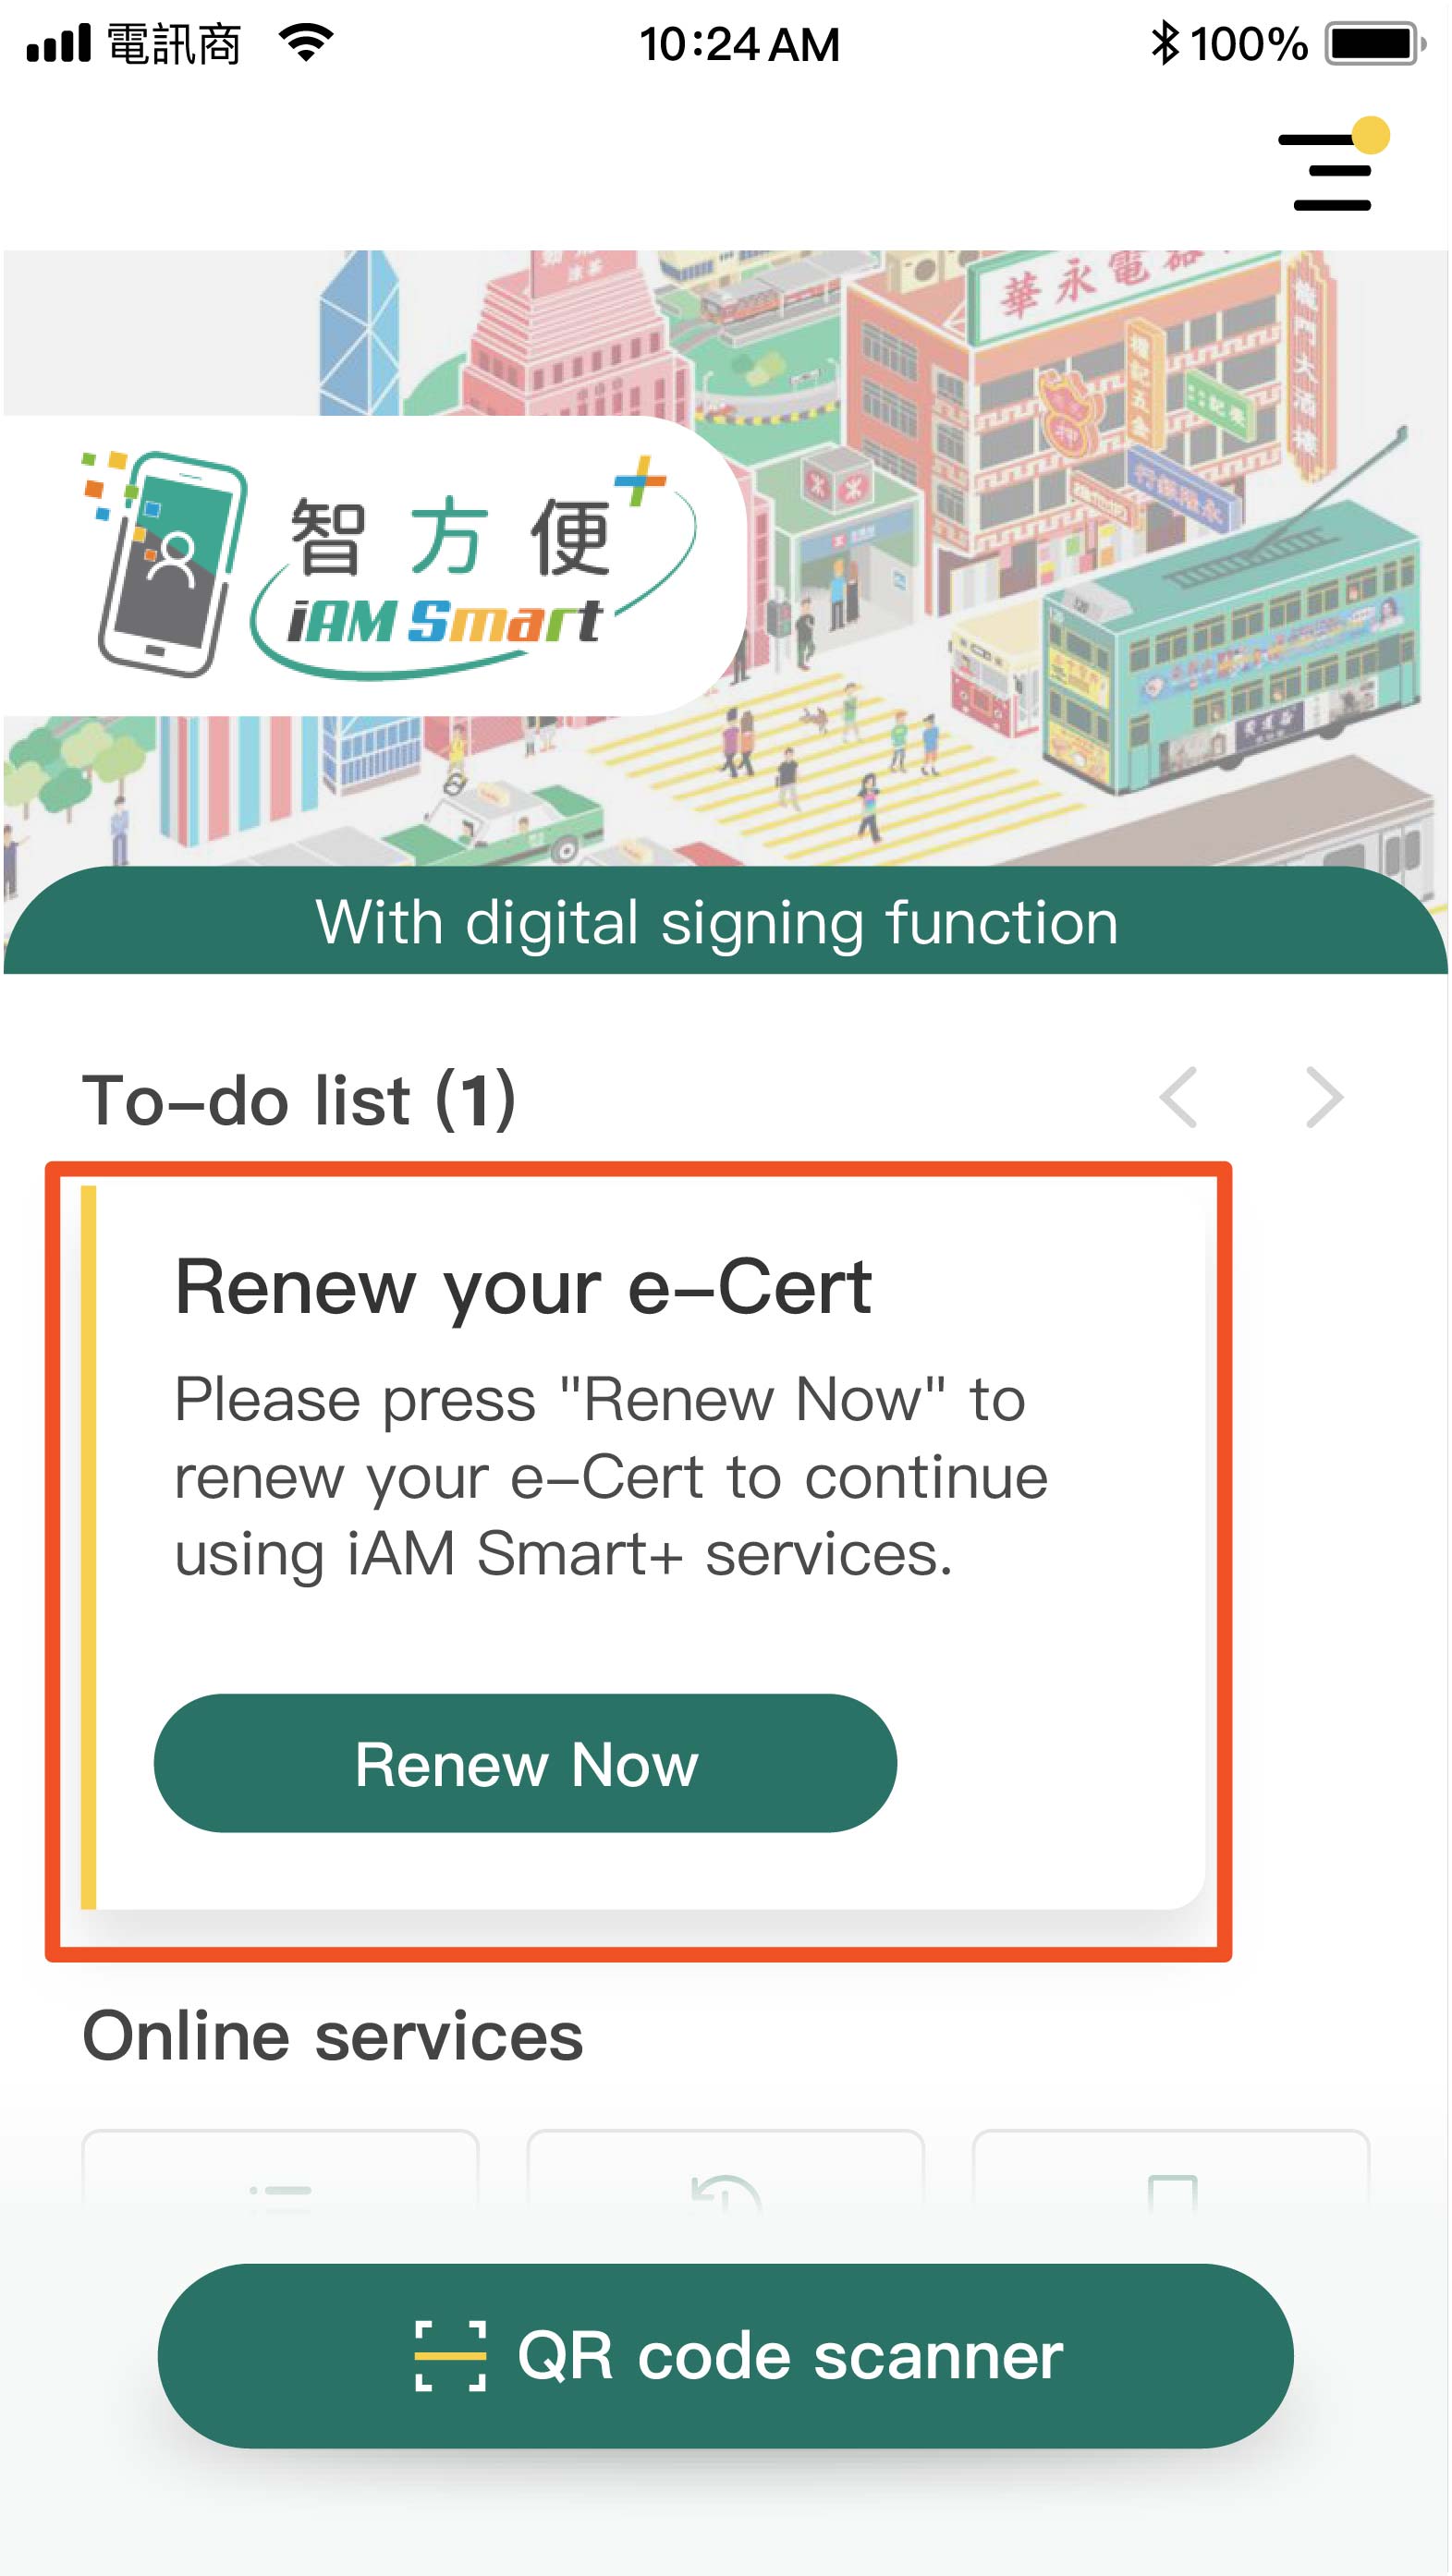 After the e-Cert re-application is completed, a "Digital signing function is available now" message 
will be displayed." title="After the e-Cert re-application is completed, a "Digital signing function is available now" message will be displayed.